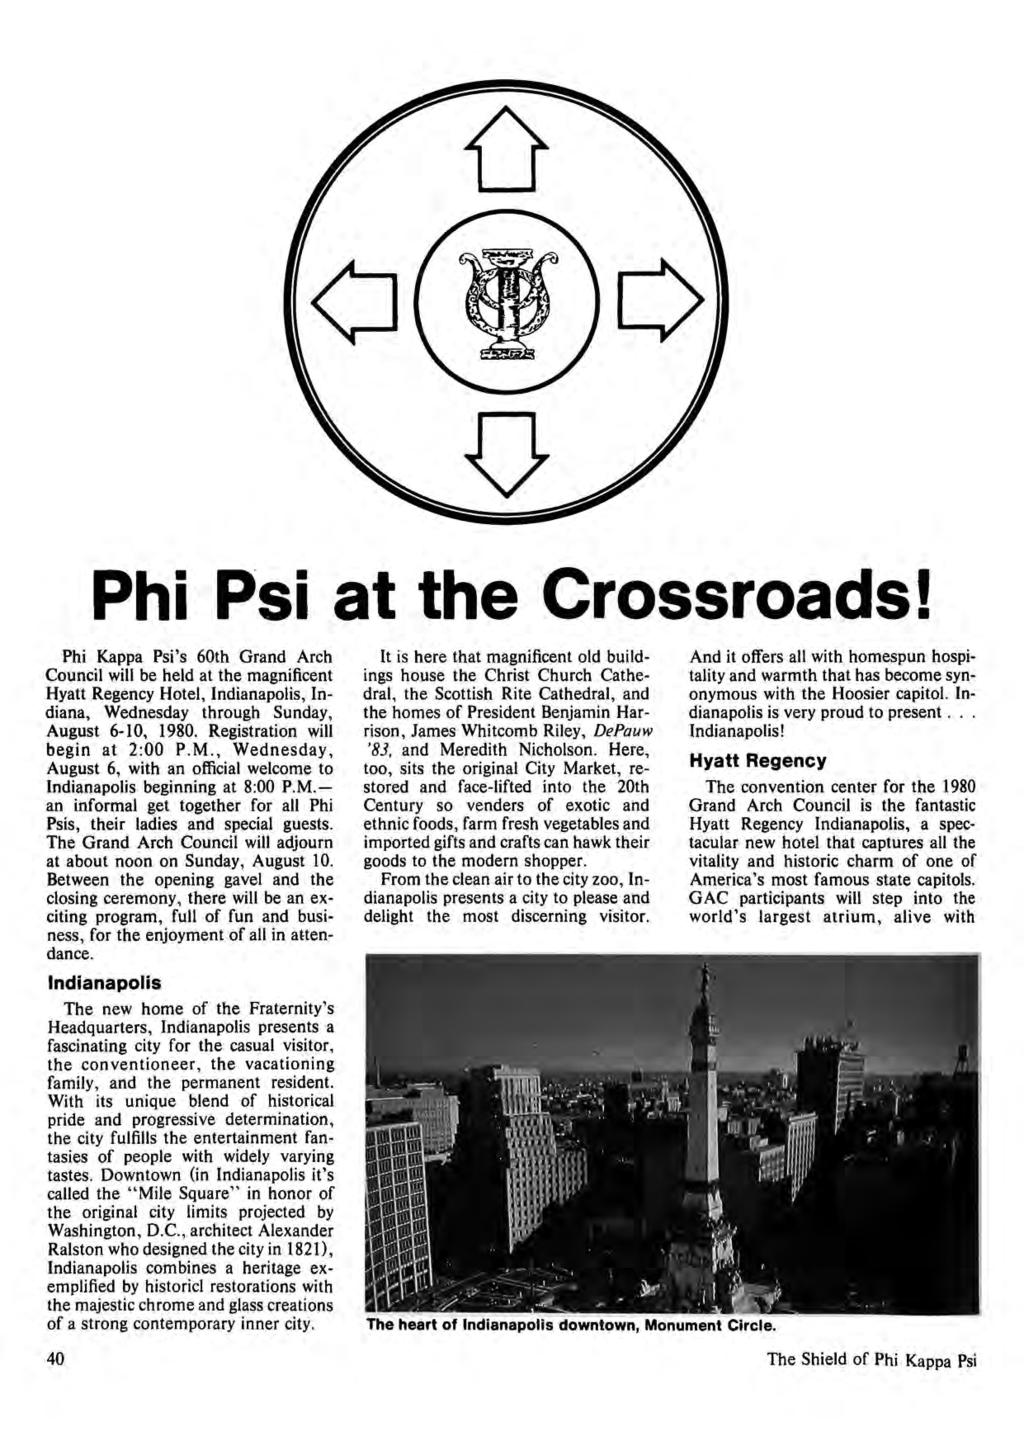 Phi Psi at the Crossroads! Phi Kappa Psi's 60th Grand Arch Council will be held at the magnificent Hyatt Regency Hotel, Indianapolis, Indiana, Wednesday through Sunday, August 6-10, 1980.